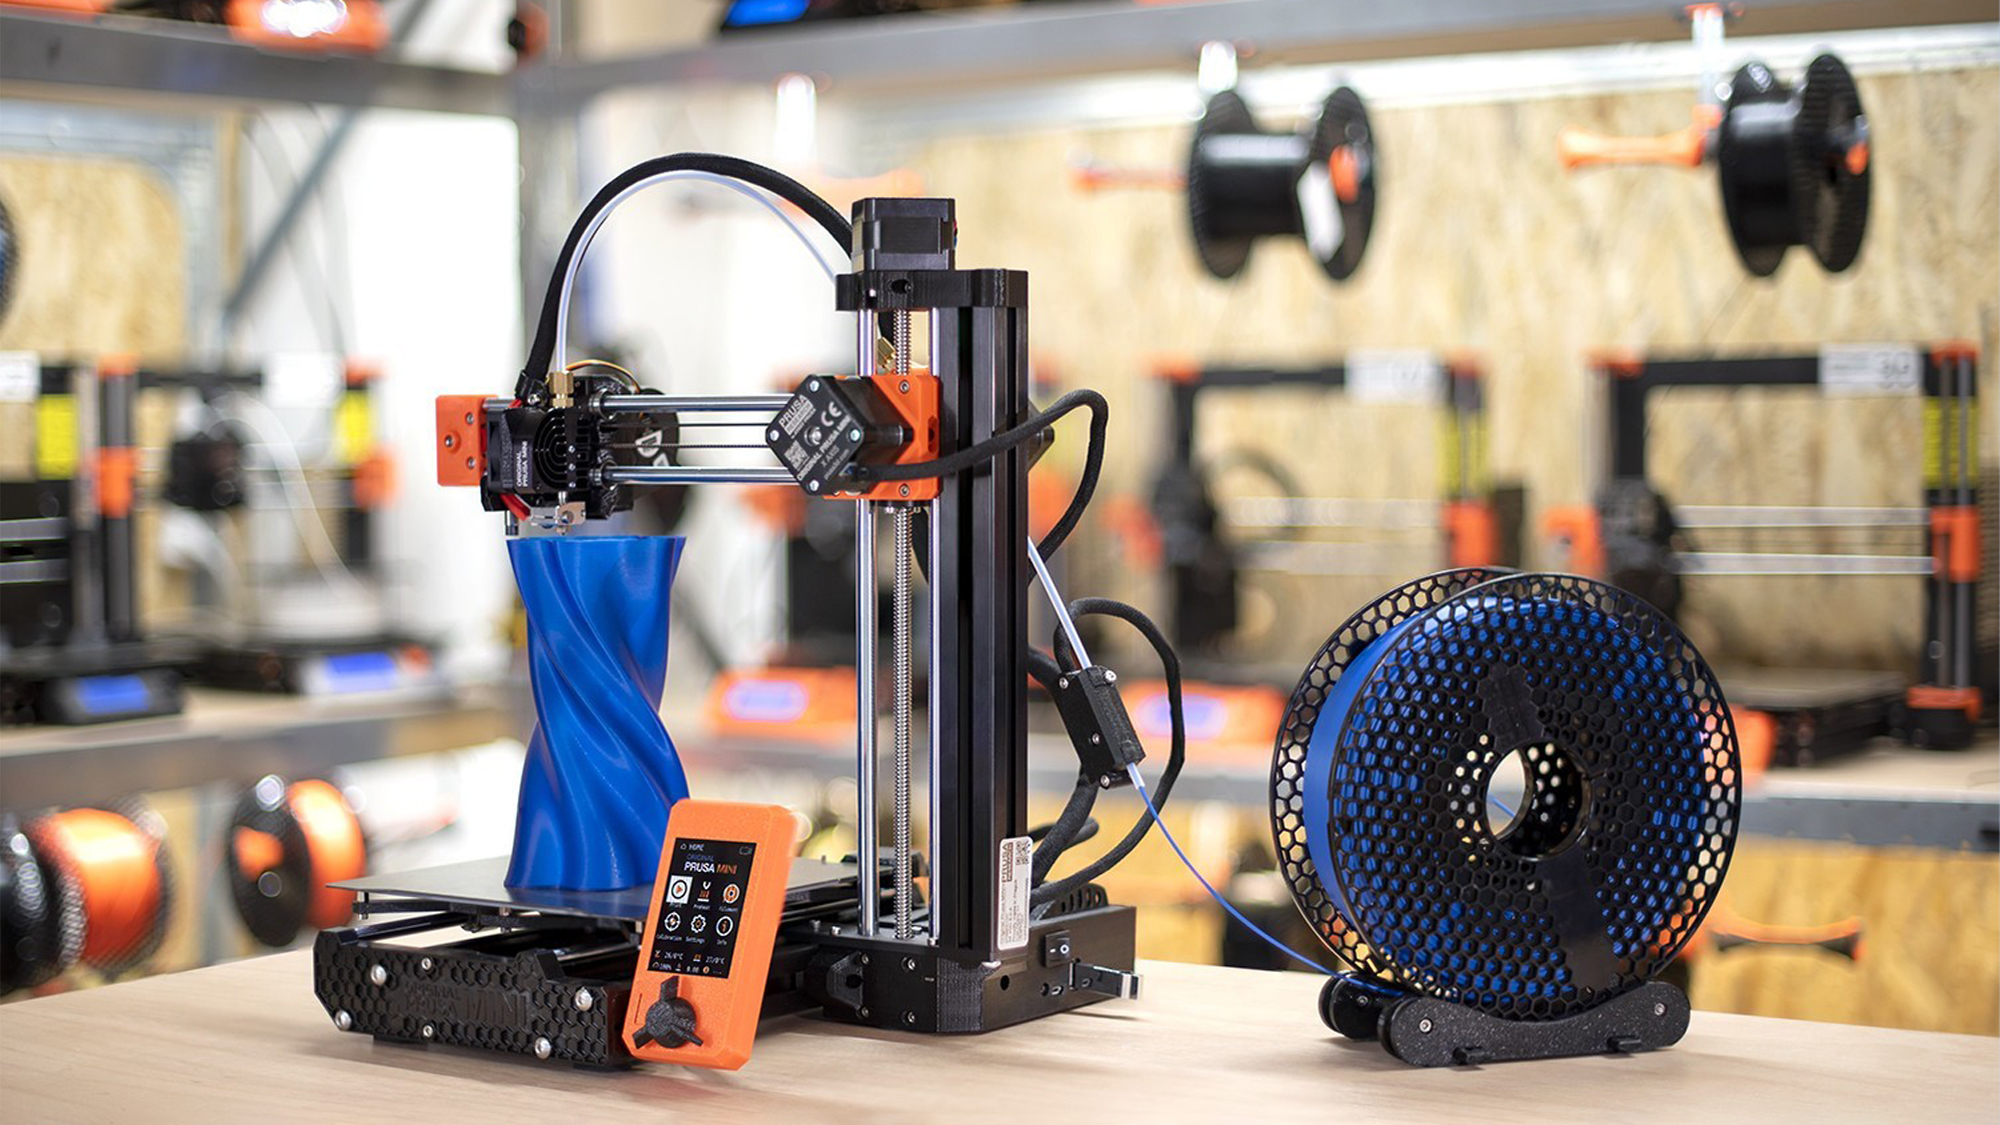 Prusa 3D review: The printer for beginners | Tom's Guide